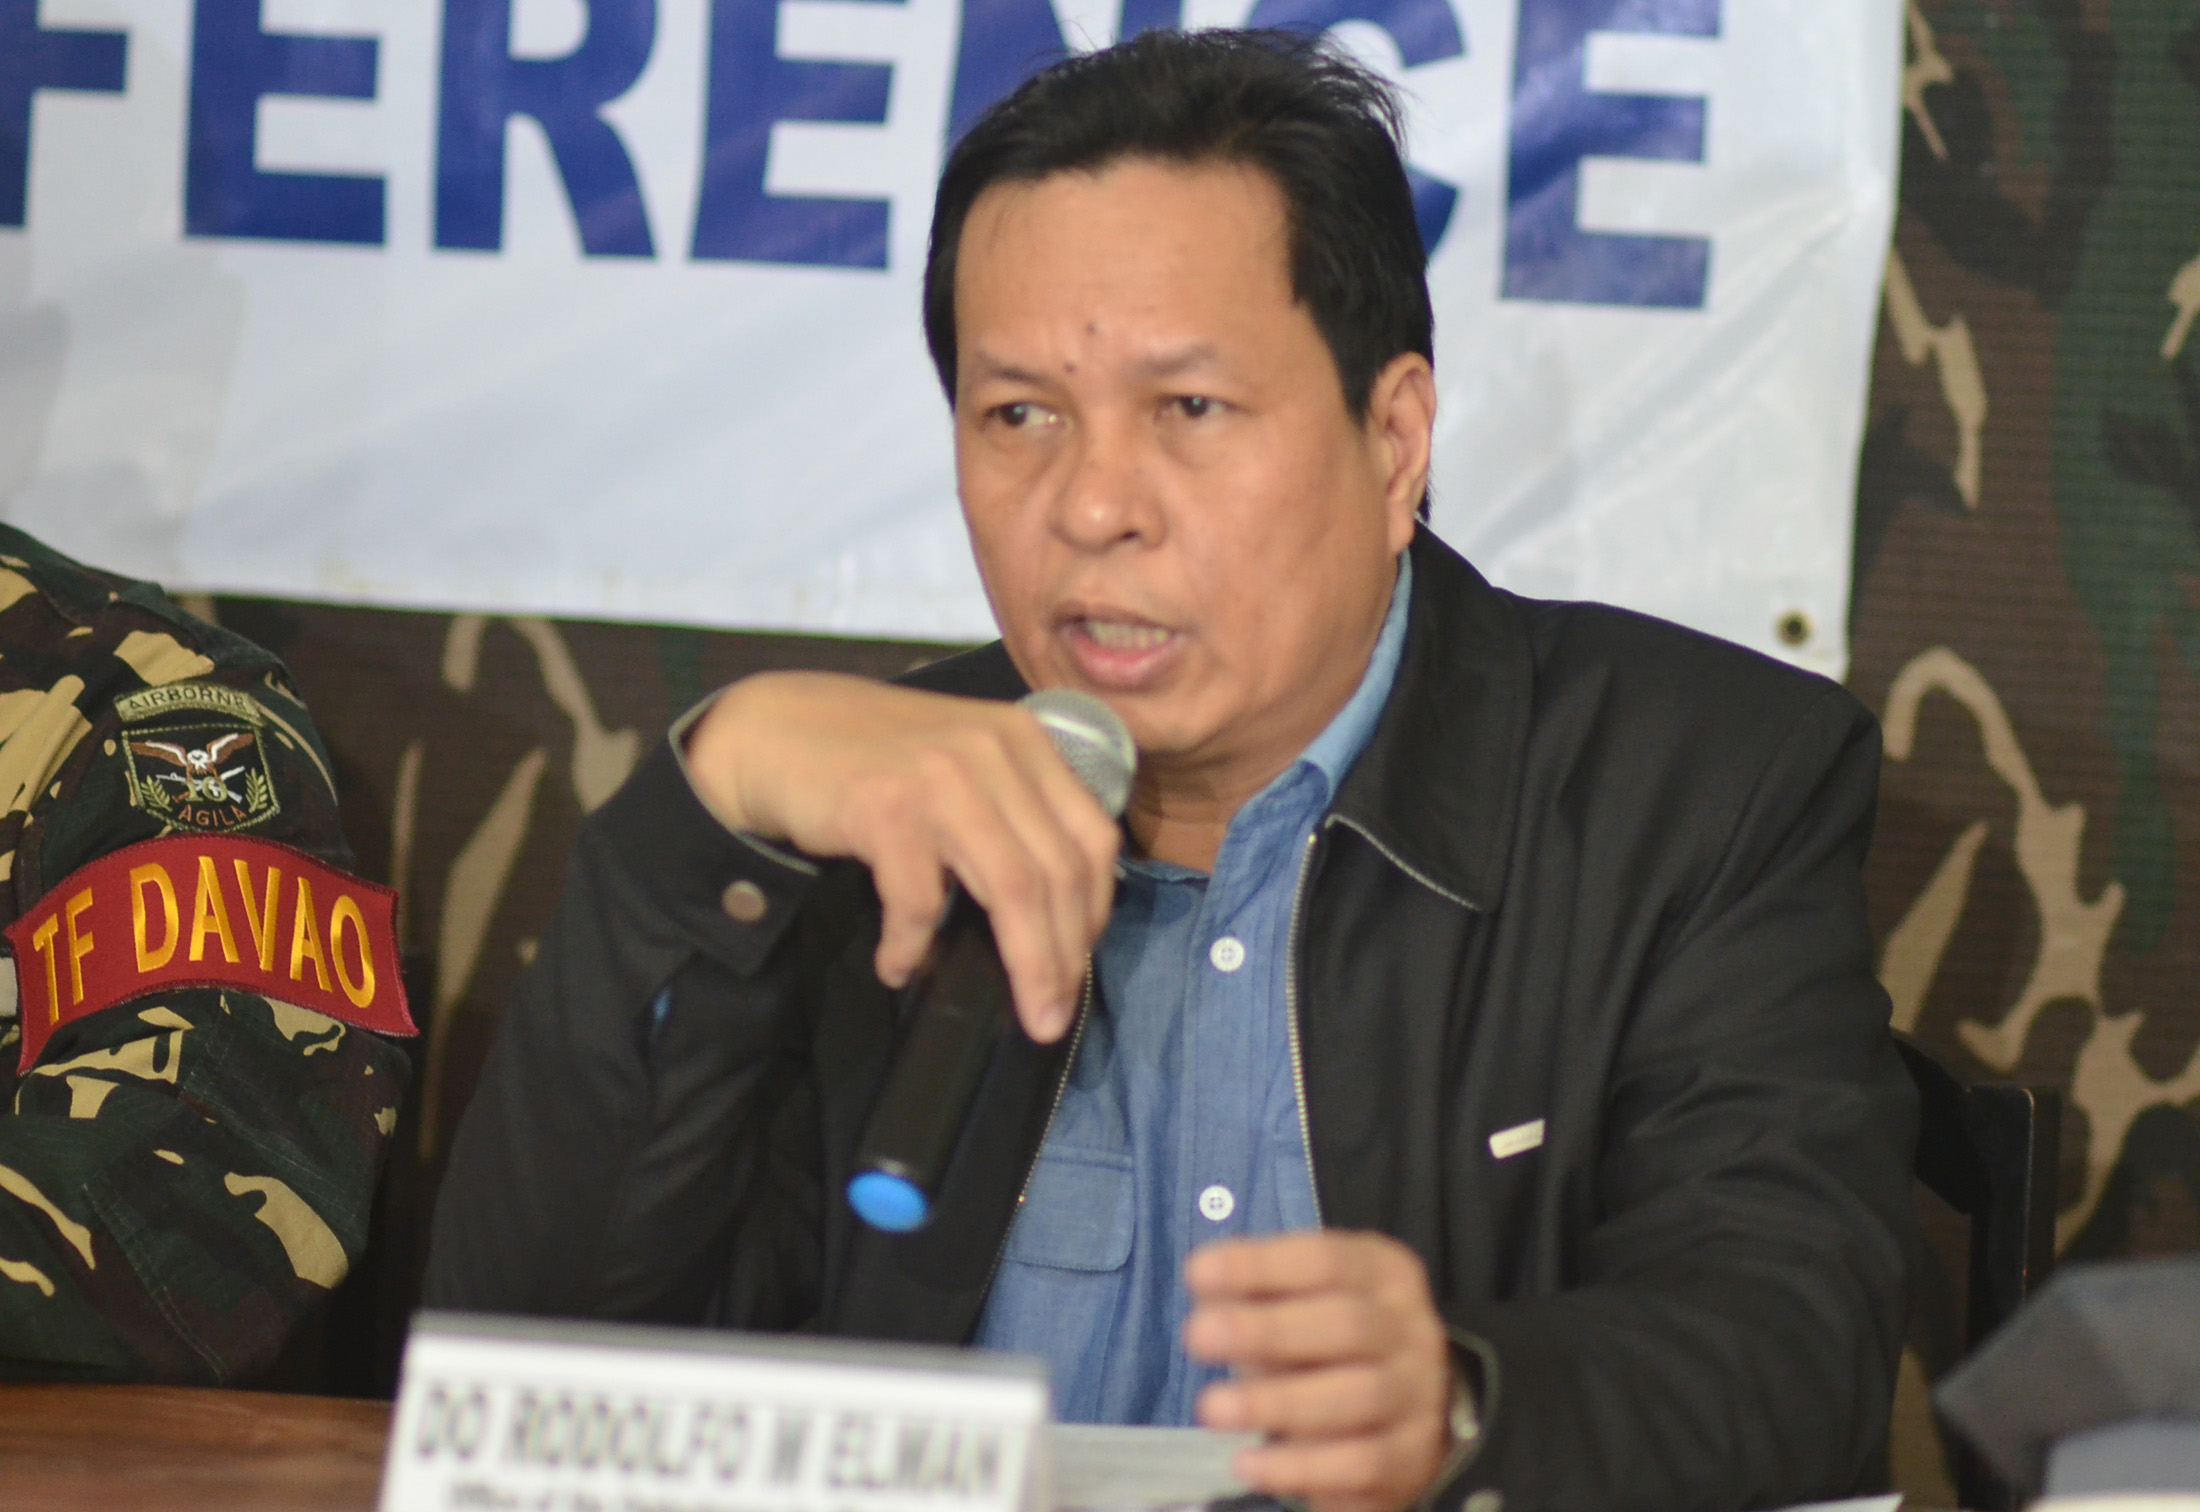 Deputy Ombudsman Rodolfo Elman speaking in a press conference in Davao City on Wednesday, July 20 about high-ranking government officials in Mindanao who were involved in graft practices and criminality. (Medel V. Hernani/davaotoday.com)